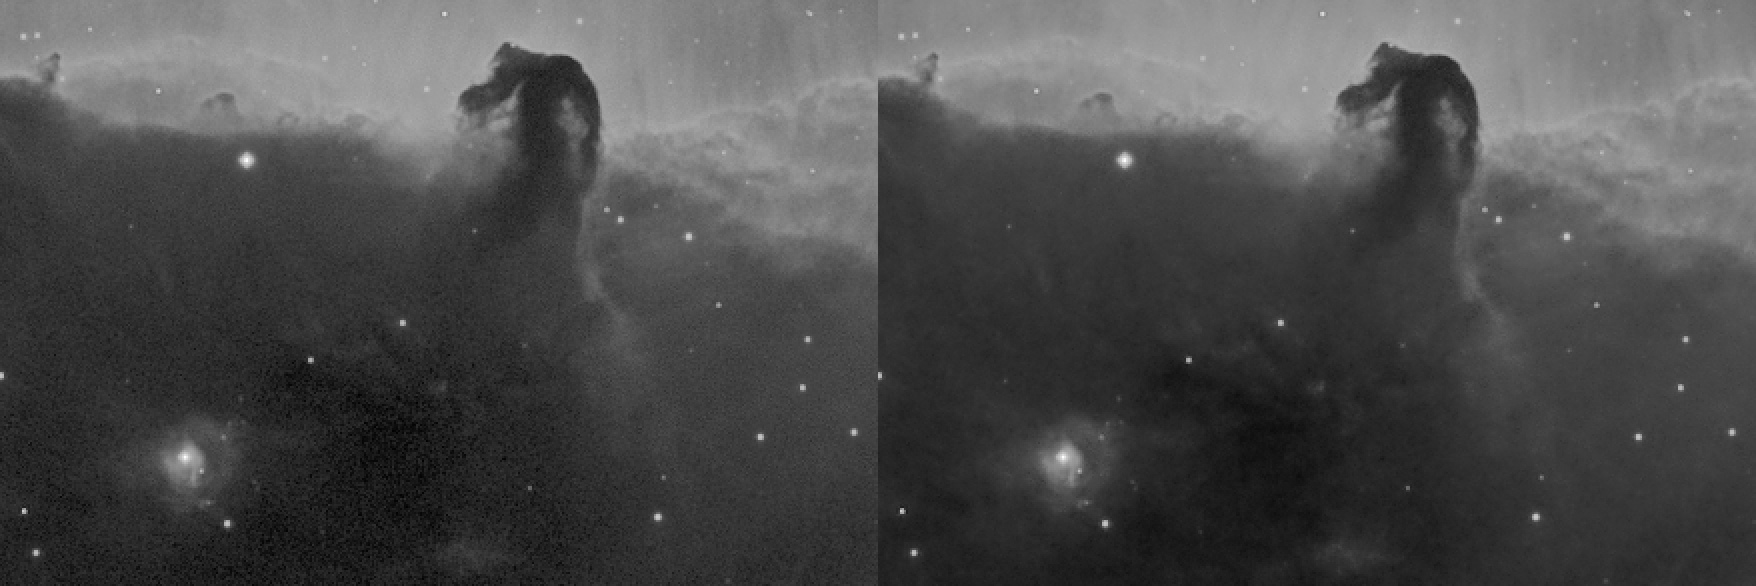 A side-by-side of an original noisy image and a denoised image.